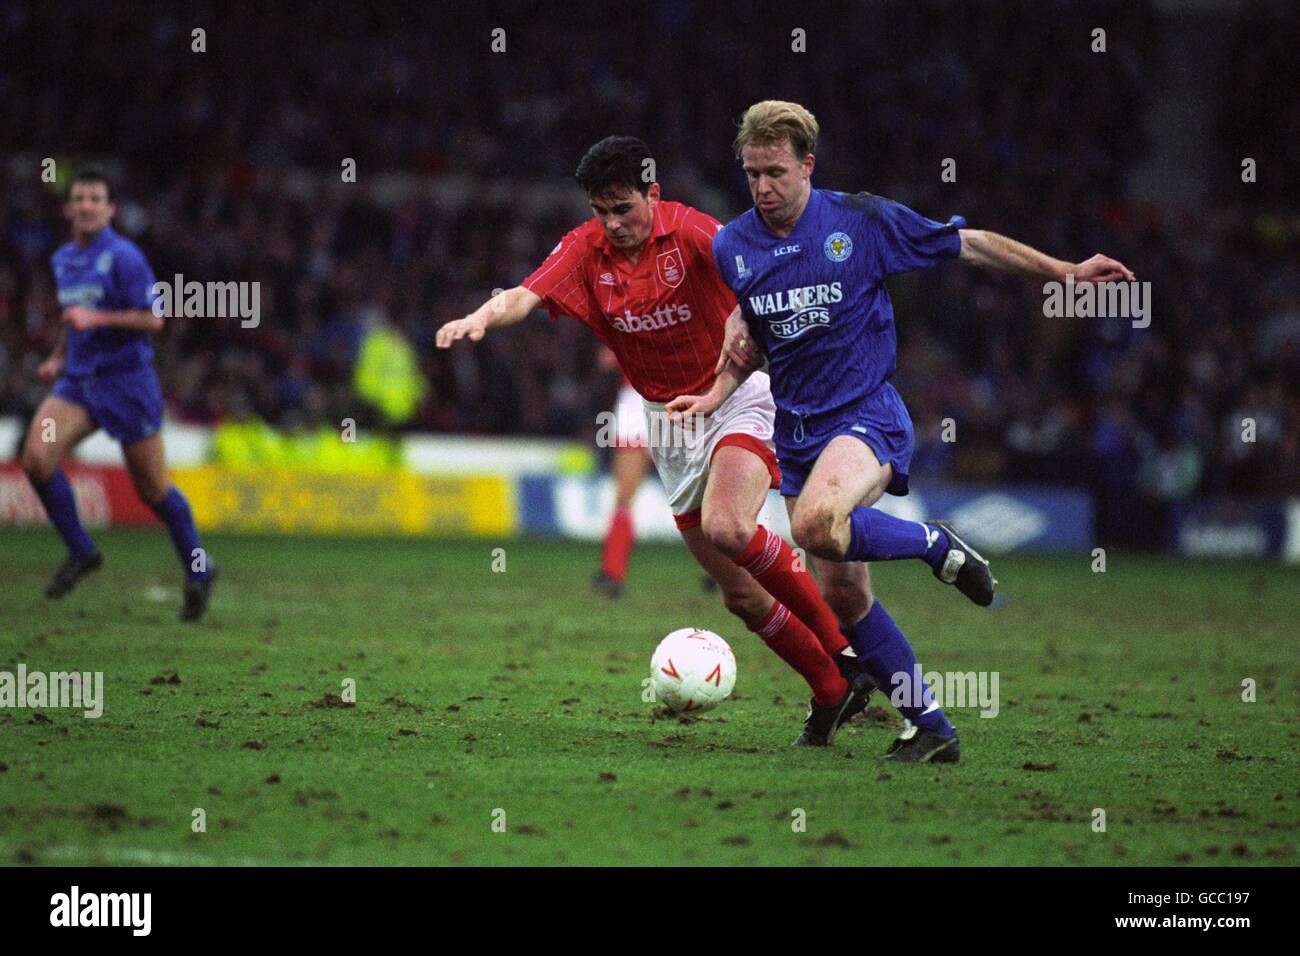 Nottingham Forest's Steve Chettle (l) and Leicester City's David Oldfield (r) battle for the ball. Stock Photo